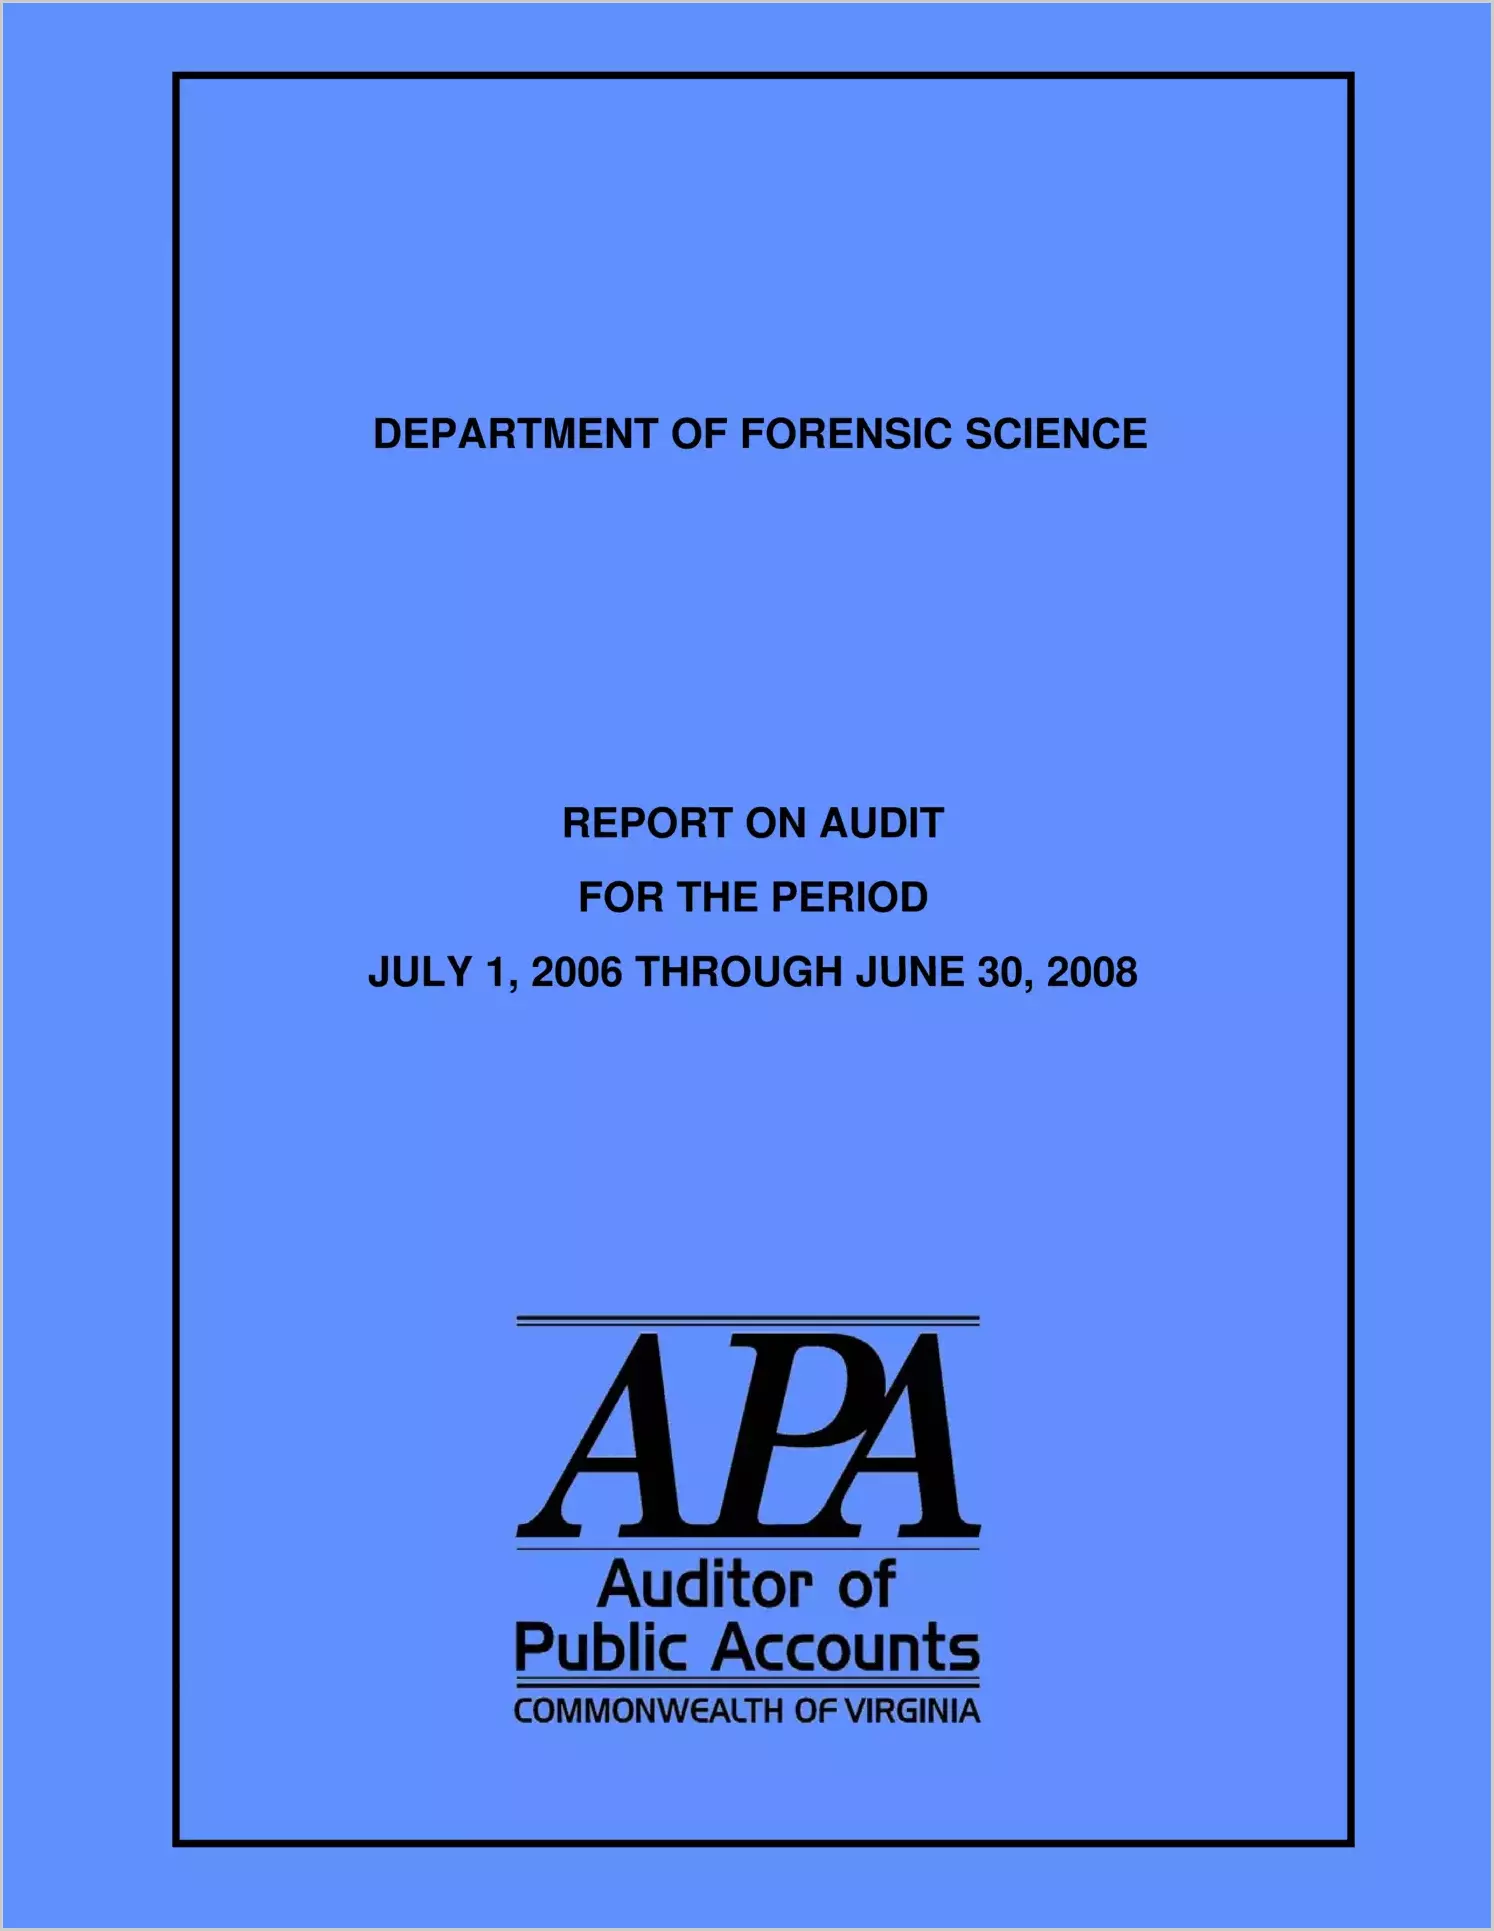 Department of Forensic Science Report on Audit for the Period July 1, 2006 through June 30, 2008